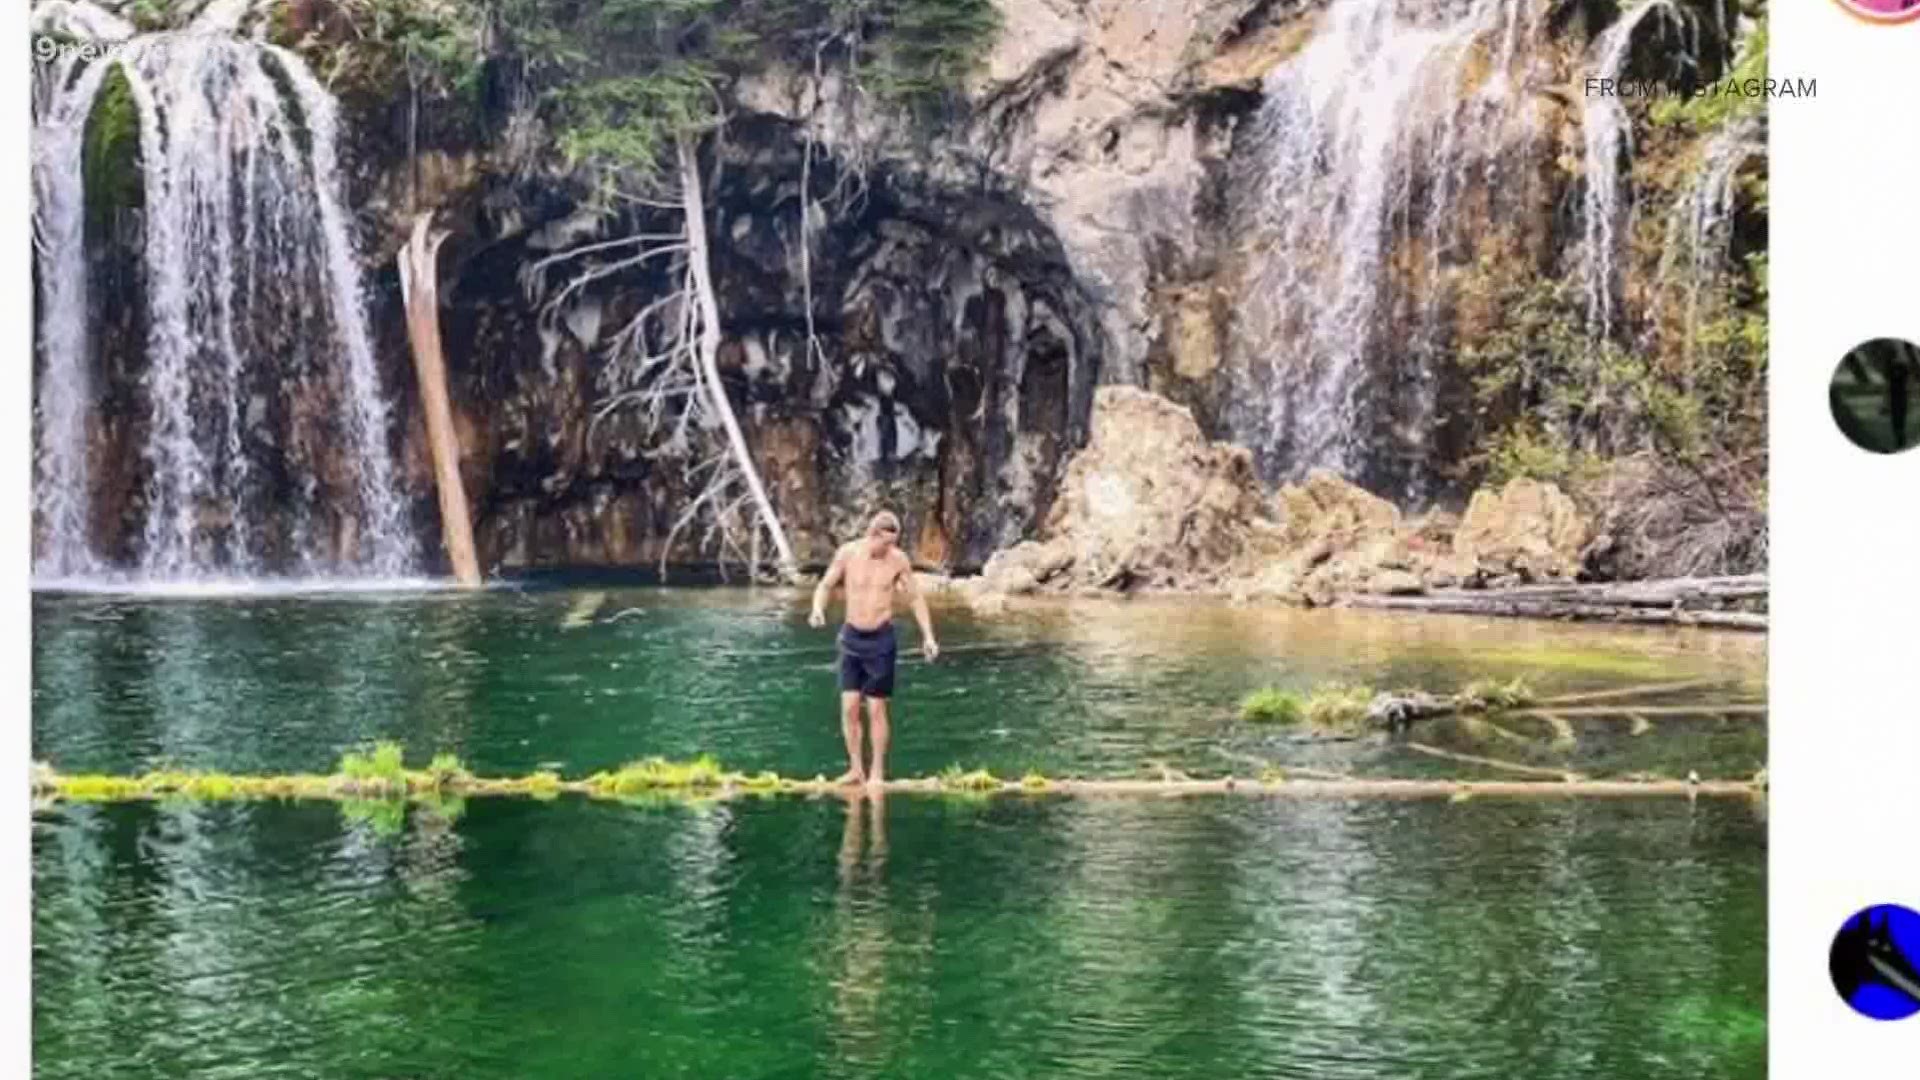 David Lesh, who bragged about going into protected Hanging Lake and snowmobiling in prohibited lands, has been hit with six federal charges.